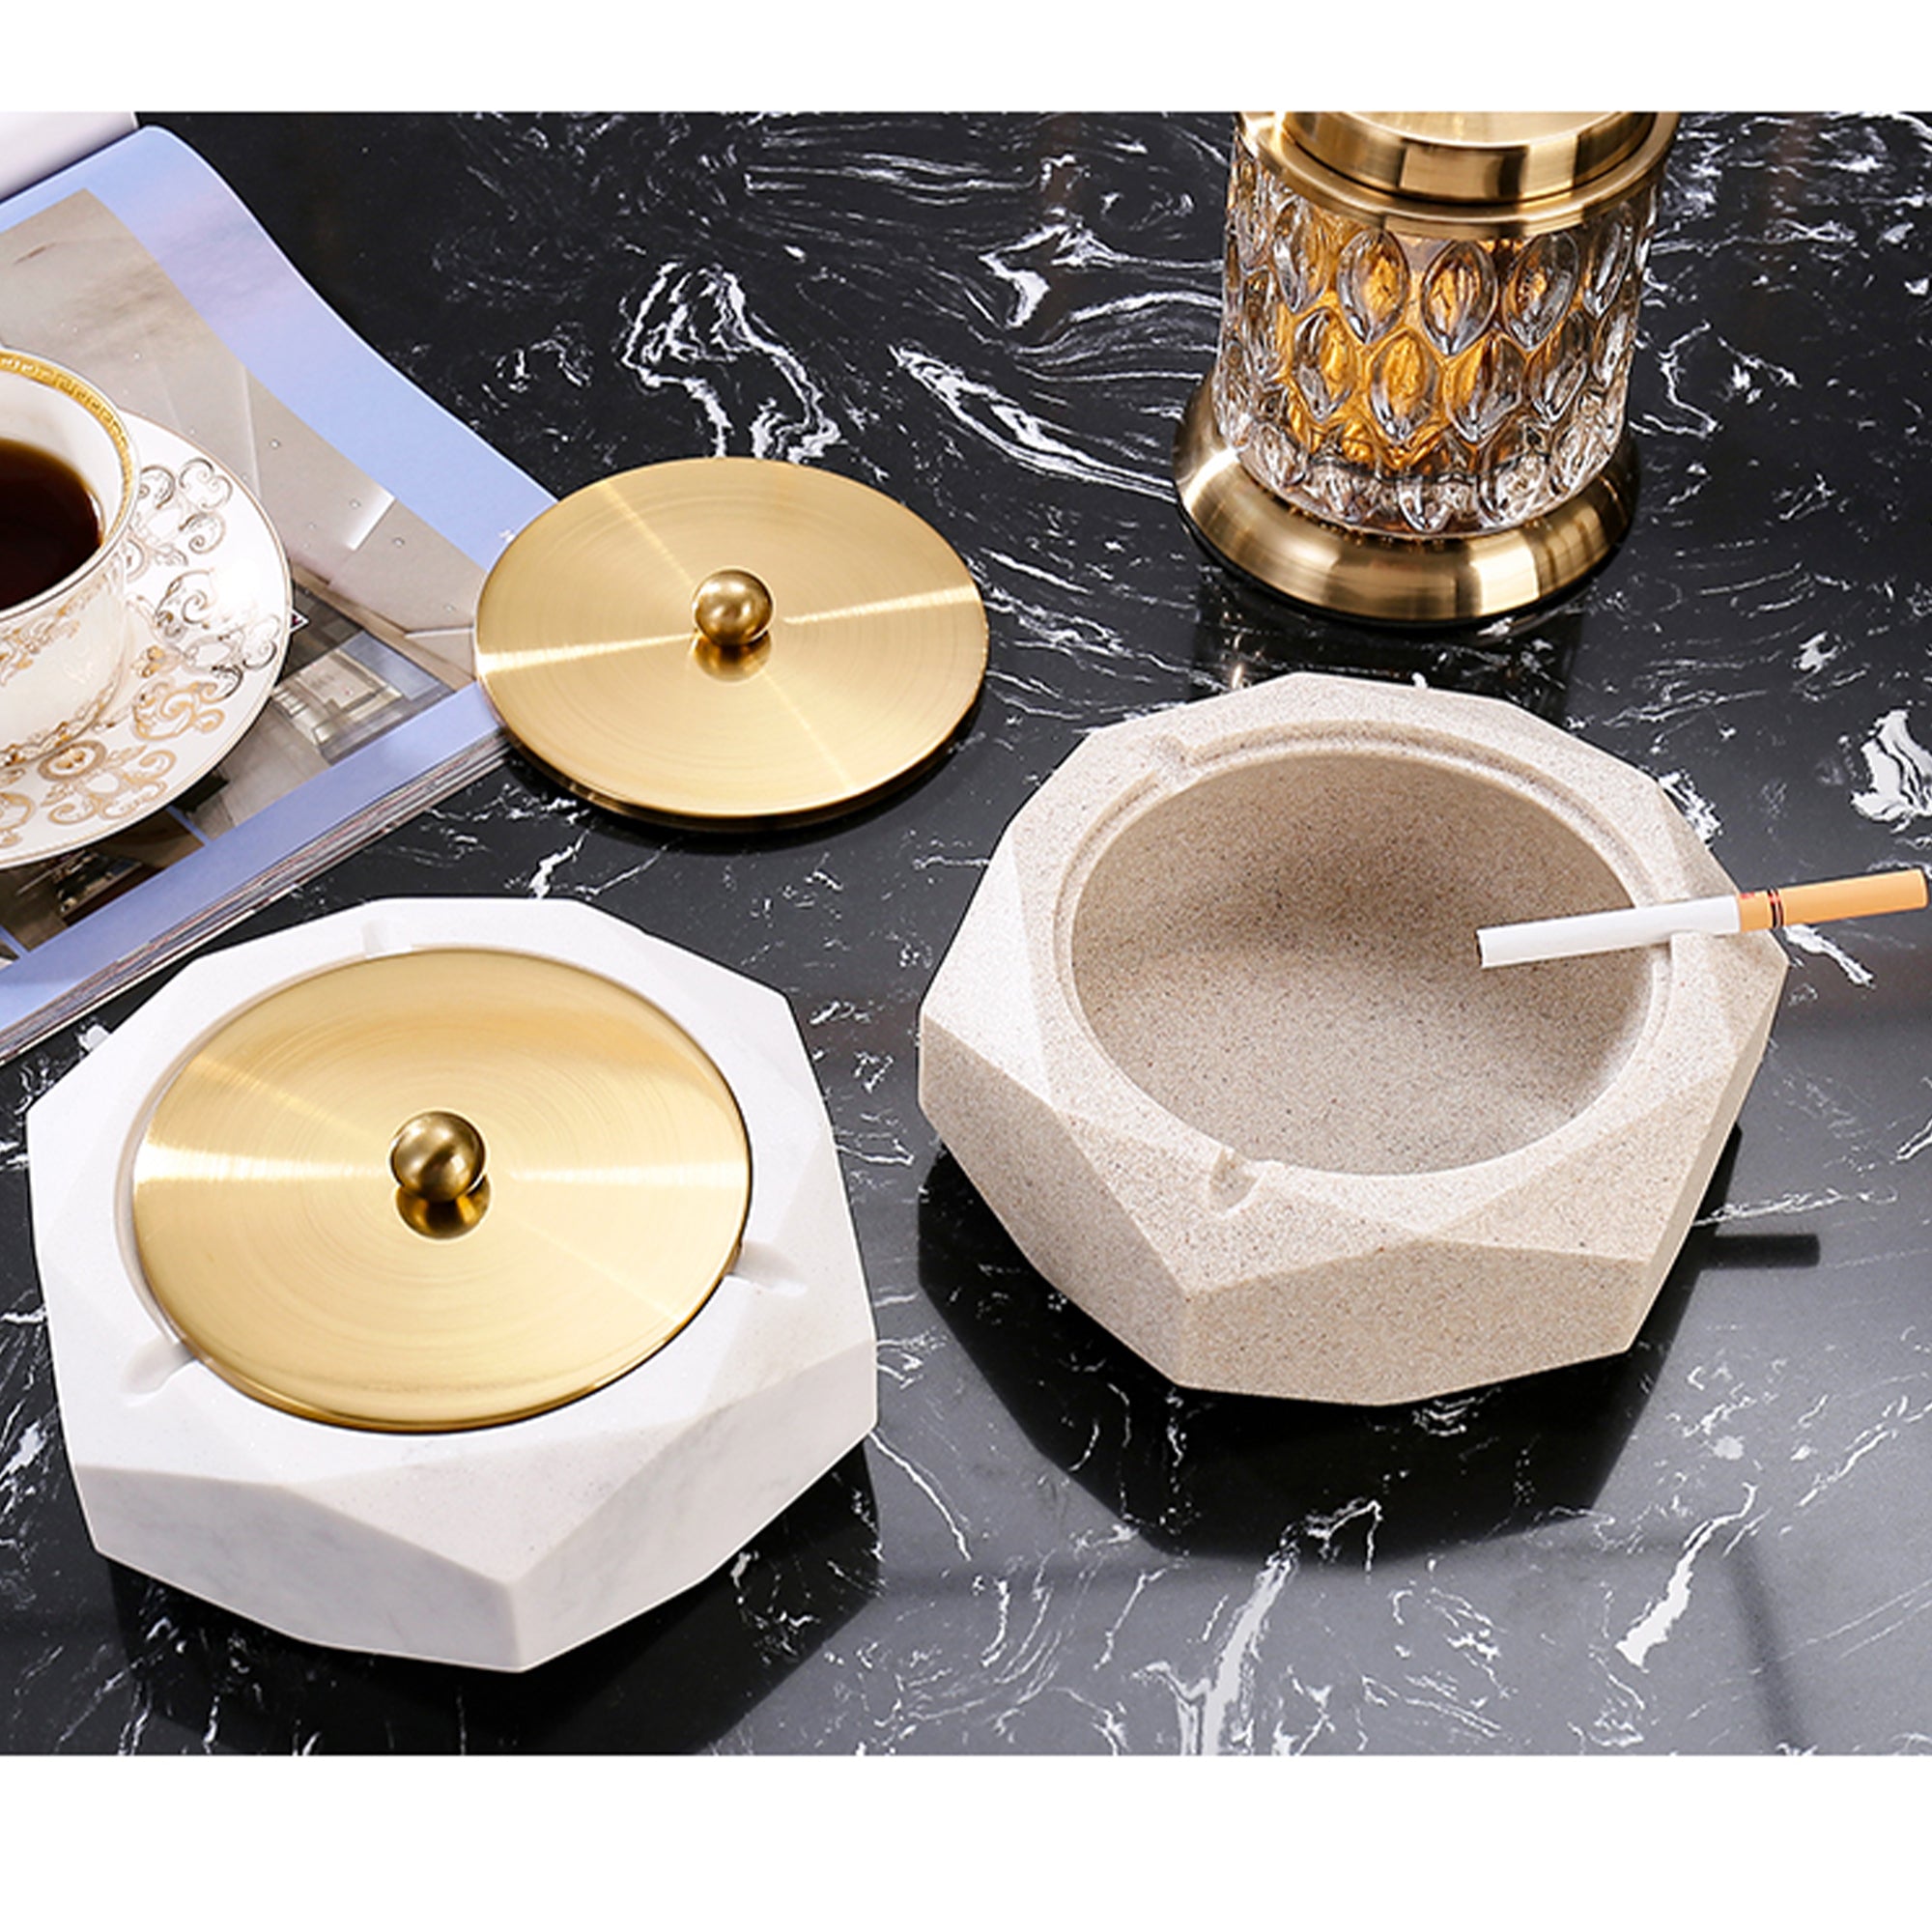 Glass Ashtray With Gold Alloy Stand Large – Ashtray Planet